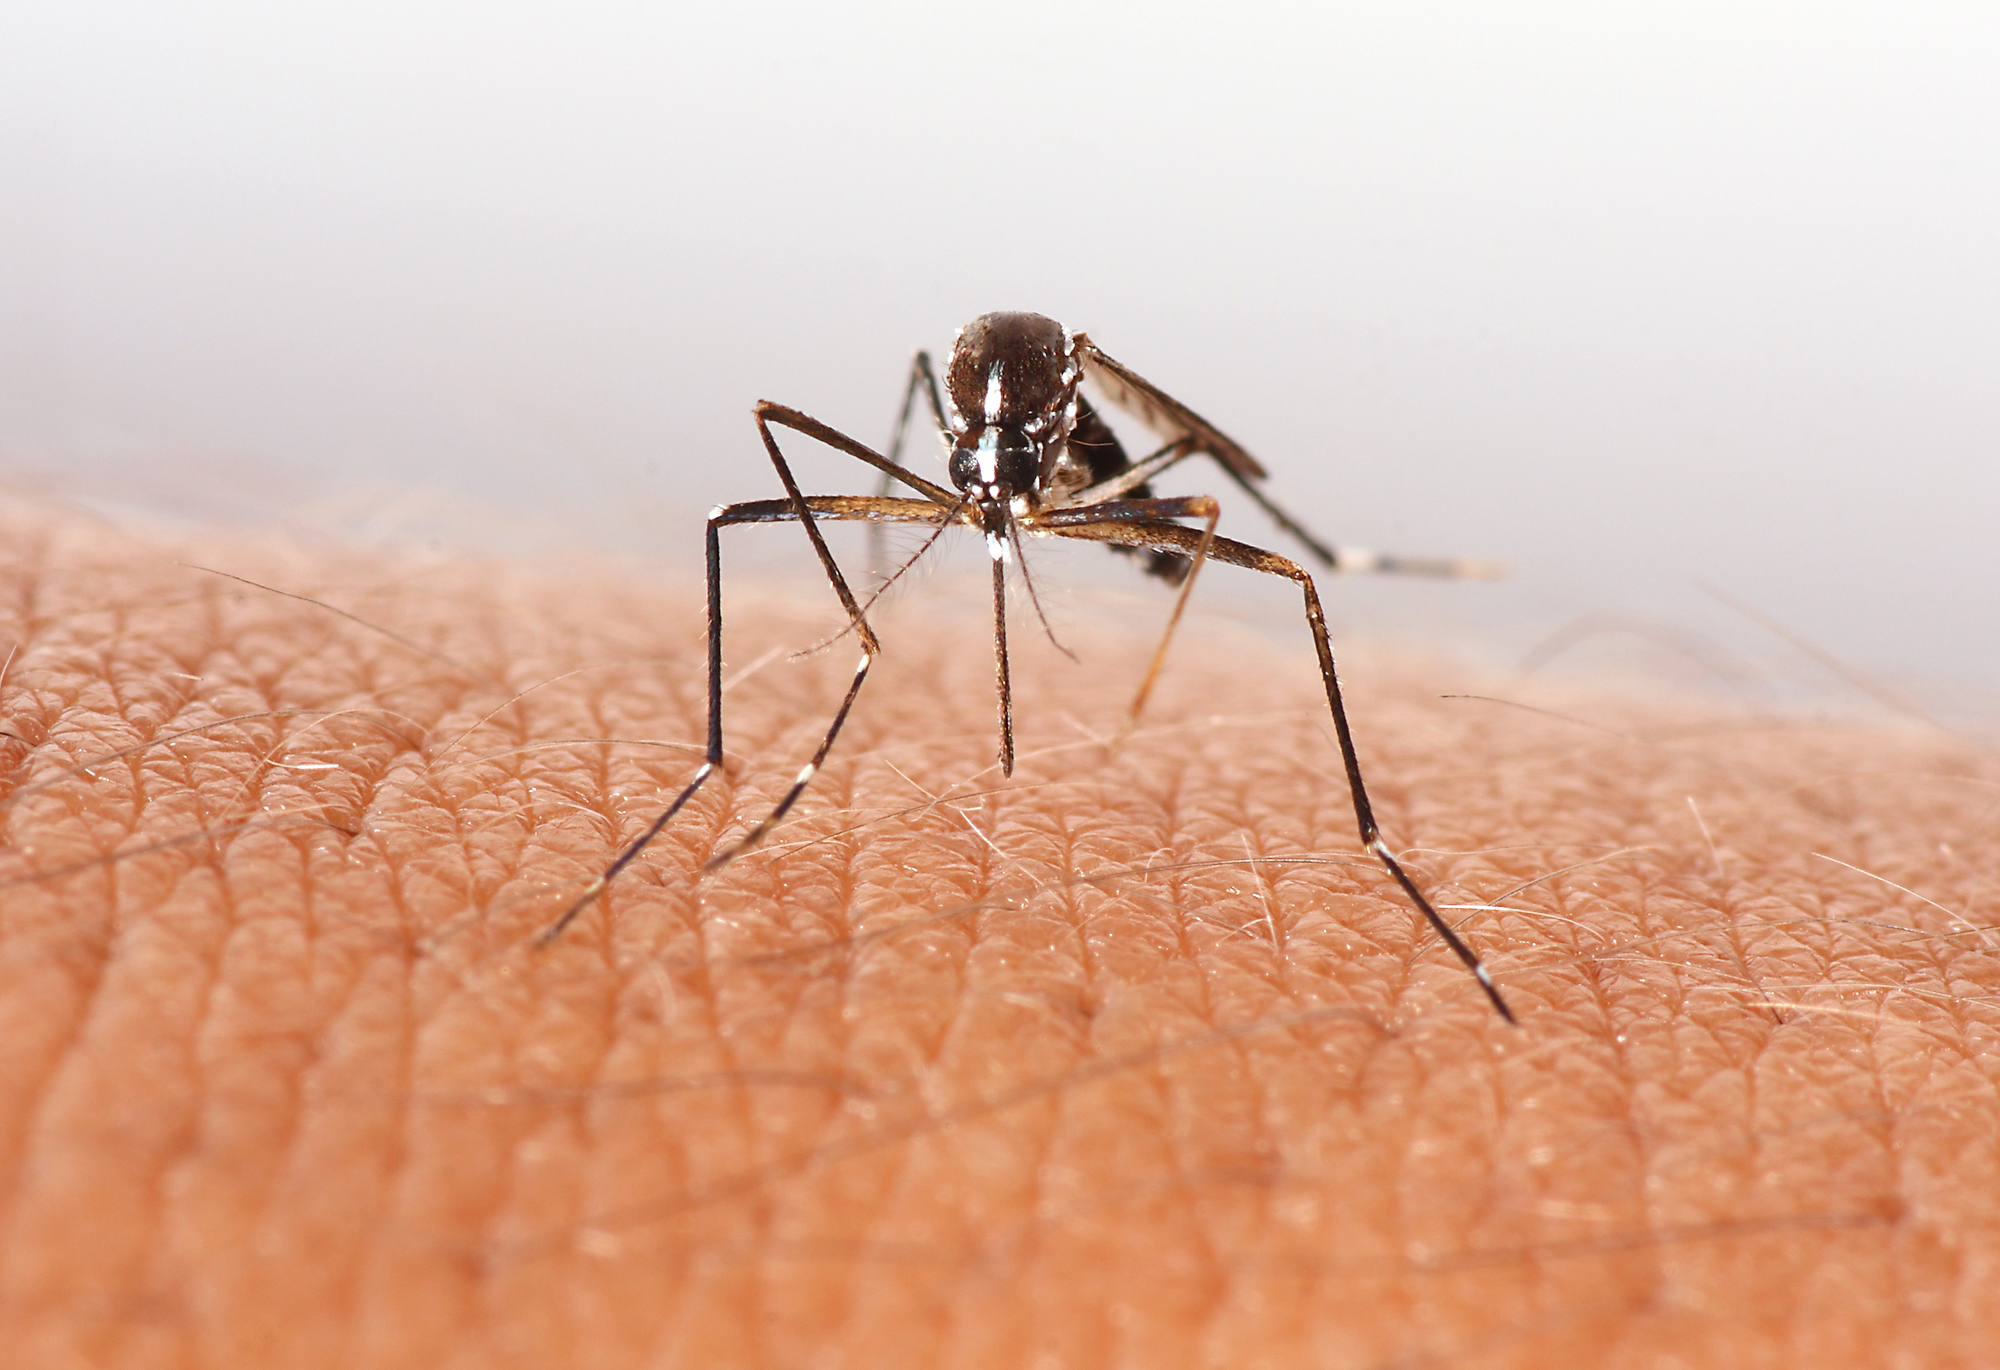 Mosquitoes are becoming resistant to our best defenses